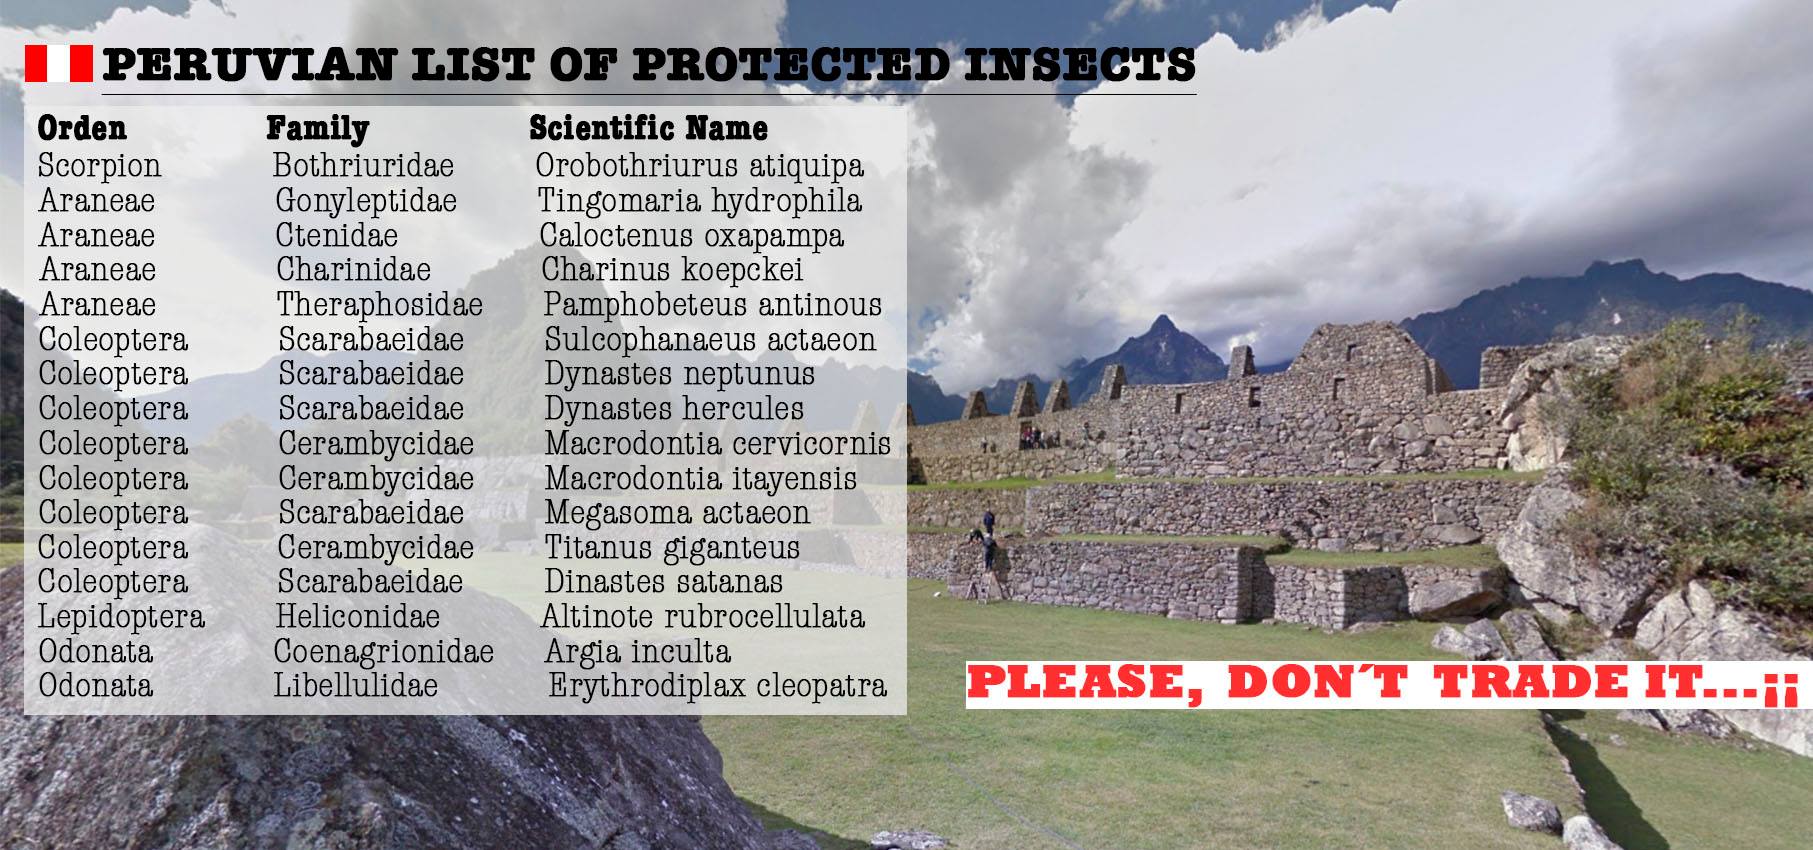 Peruvian Protected Insects